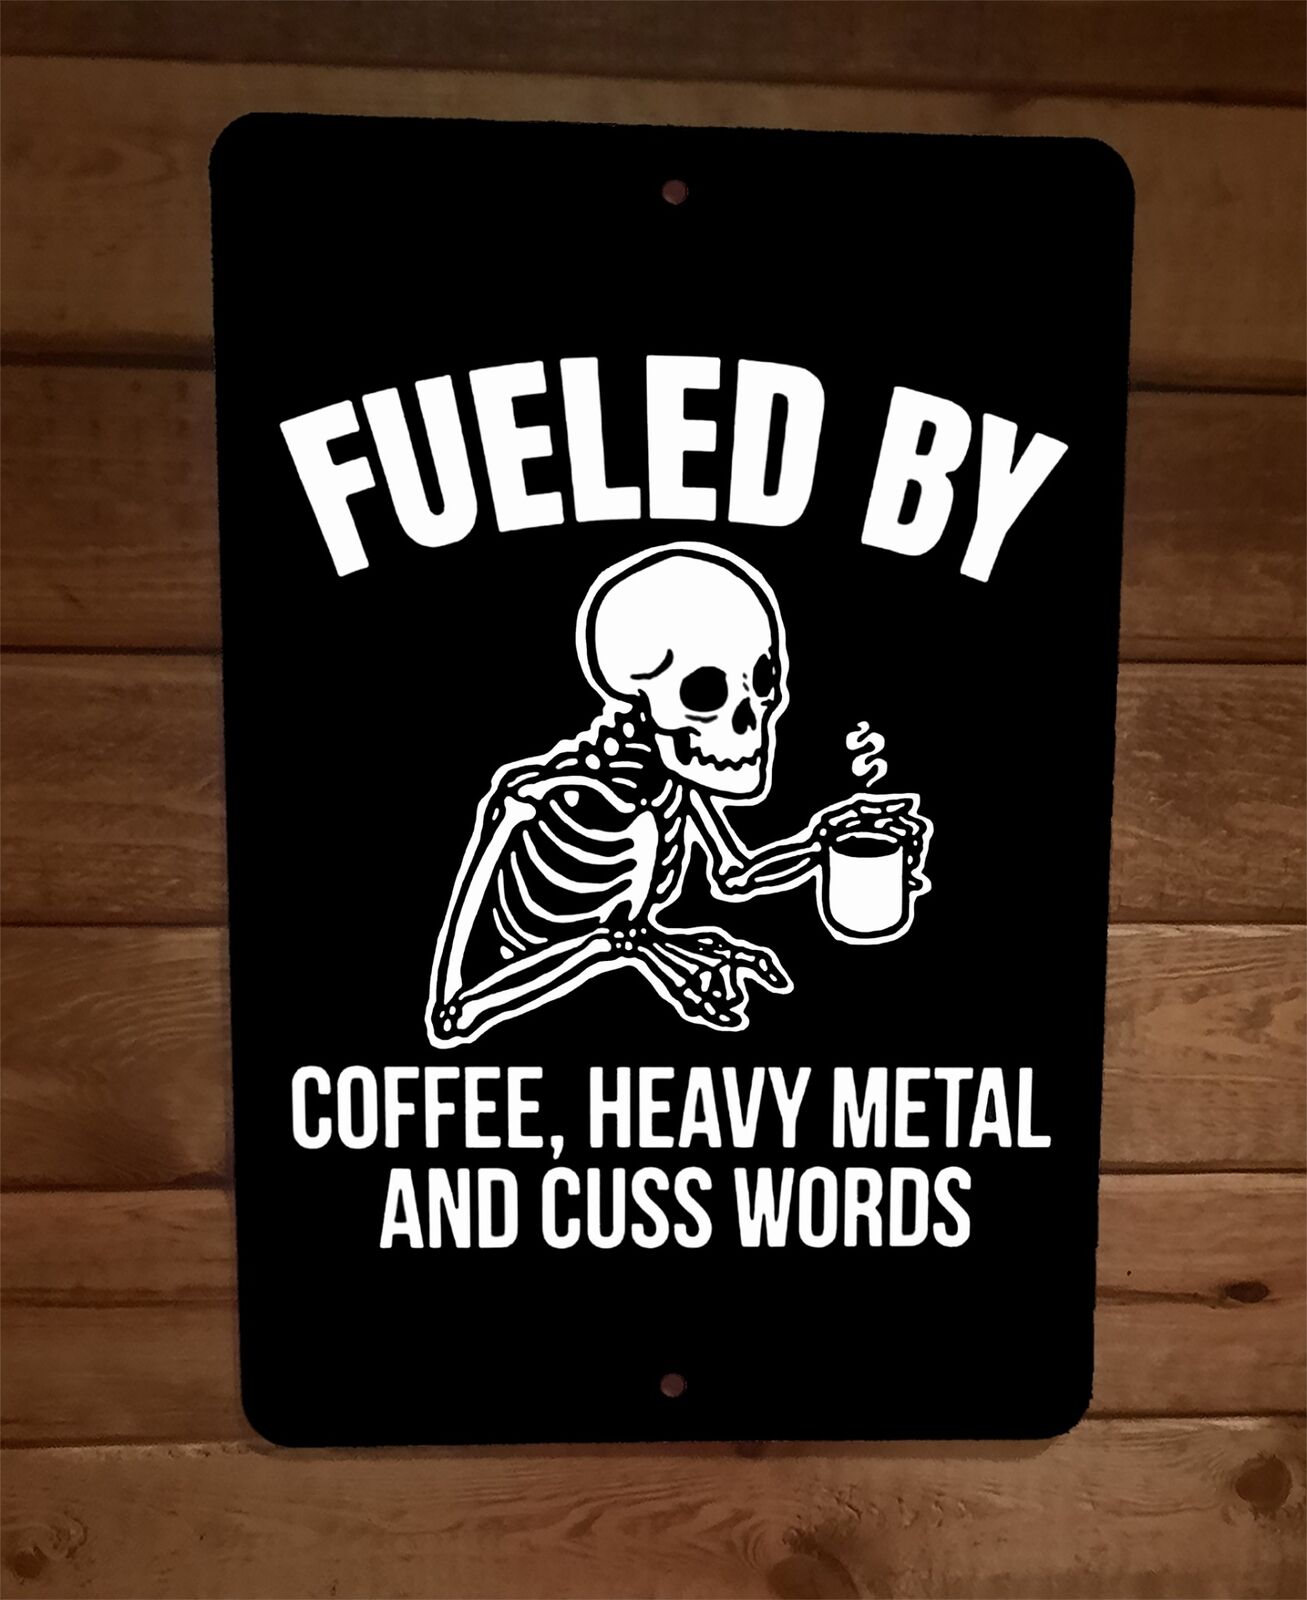 Fueled By Coffee Heavy Metal and Cuss Word Skeleton 8x12 Metal Wall Sign